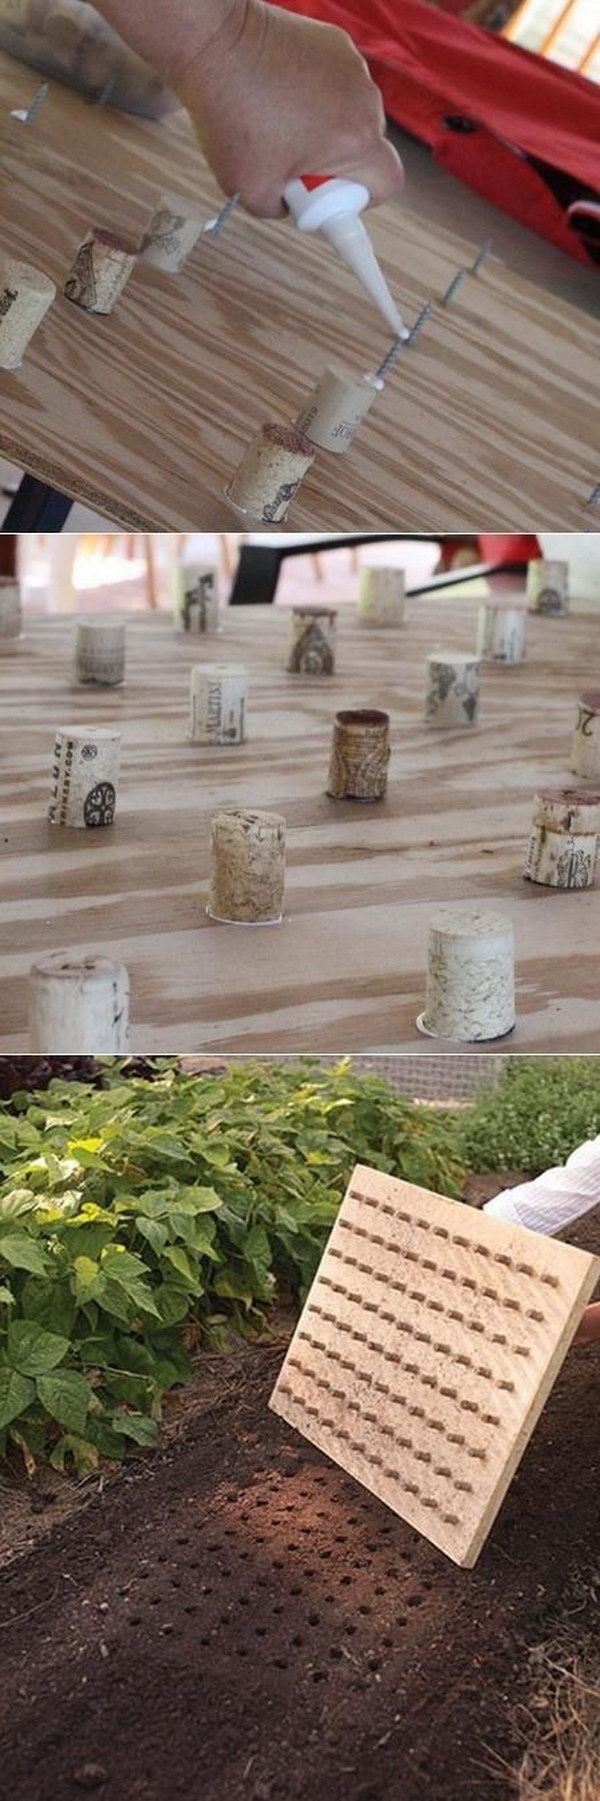 Make an Easy Seed Hole Maker out of Wine Corks and a Piece of Wood 